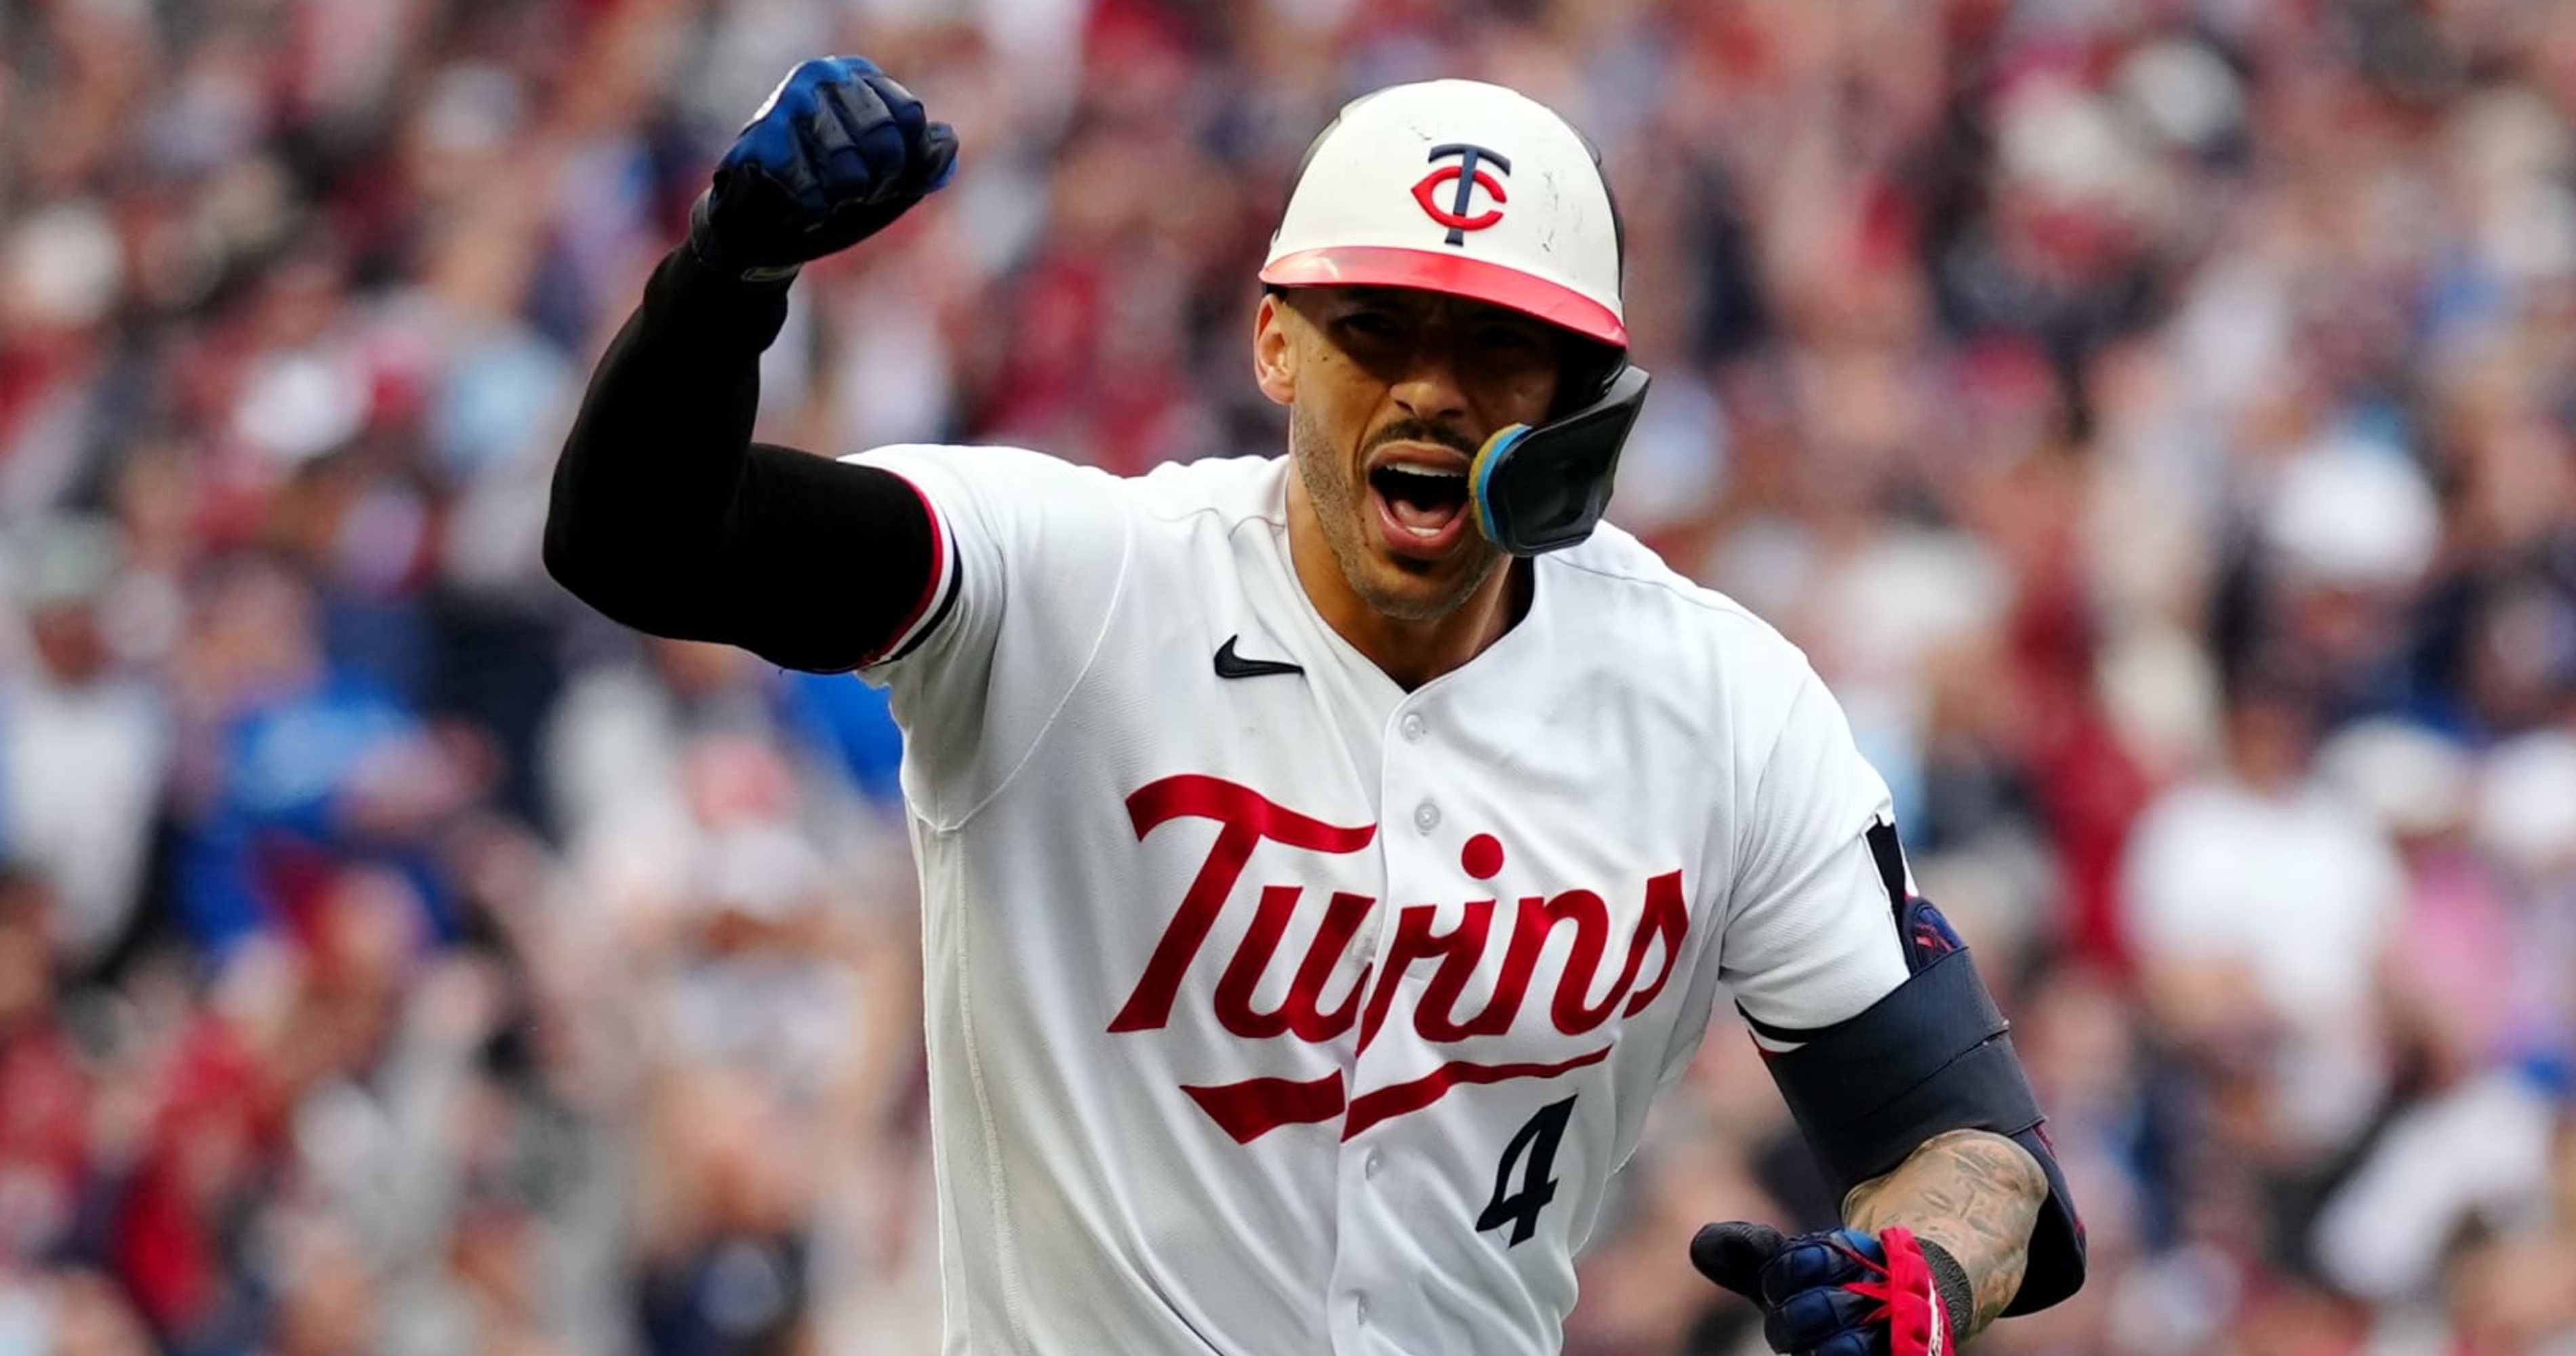 Twins vs. Astros Early Odds and Preview for ALDS After Wild Card